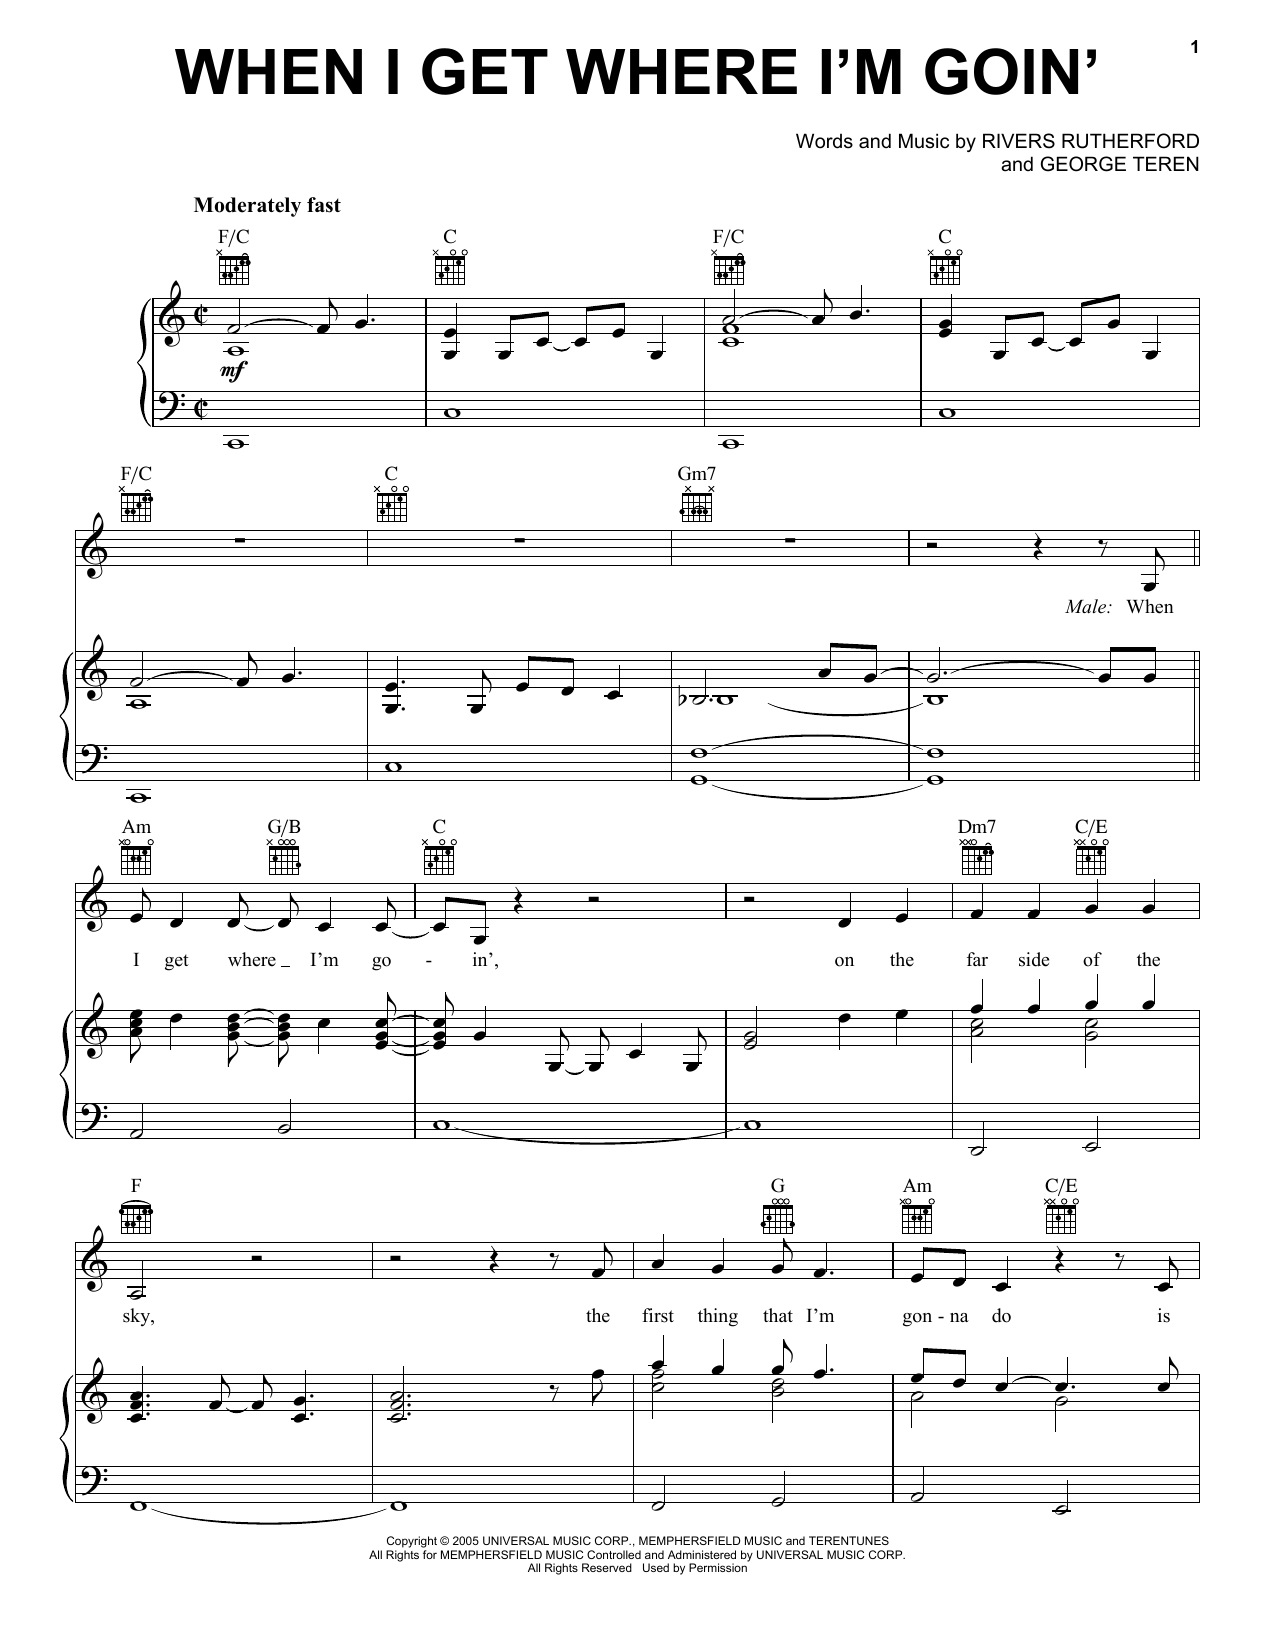 Download Brad Paisley featuring Dolly Parton When I Get Where I'm Goin' Sheet Music